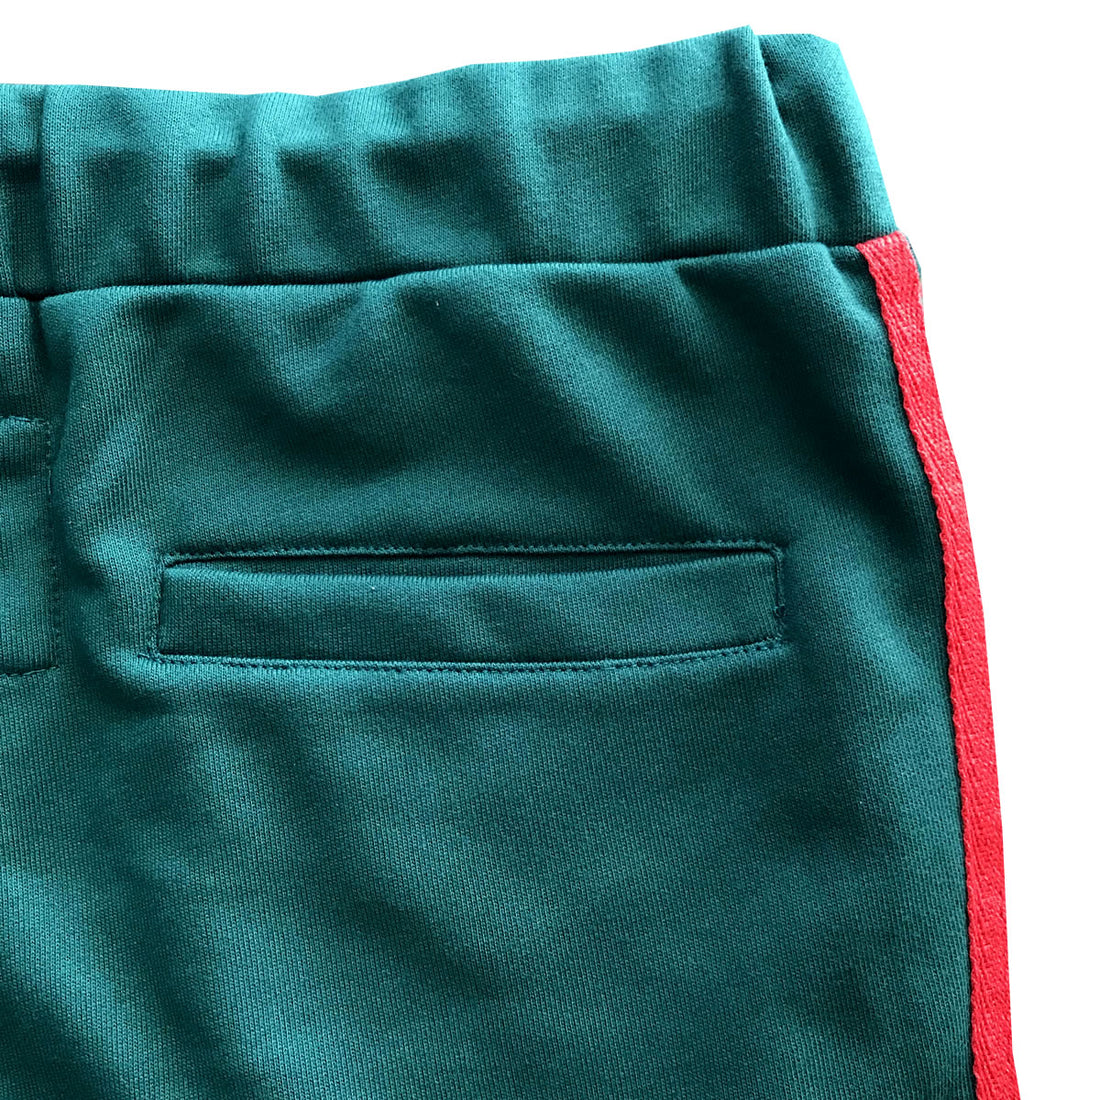 Green with Red Stripes Skinny Fit Jogger Sweatpants